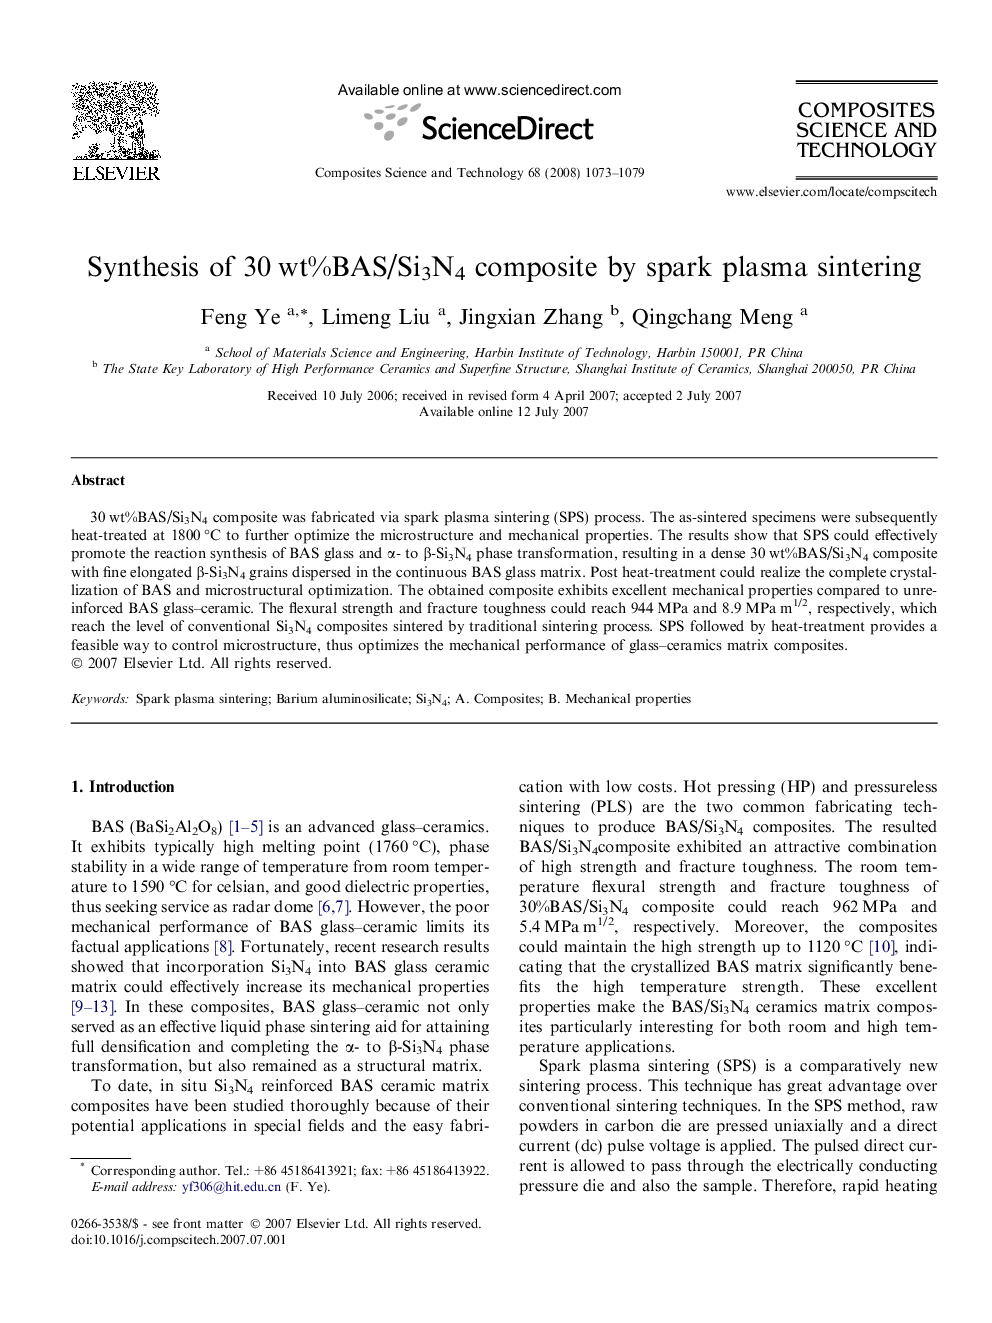 Synthesis of 30 wt%BAS/Si3N4 composite by spark plasma sintering